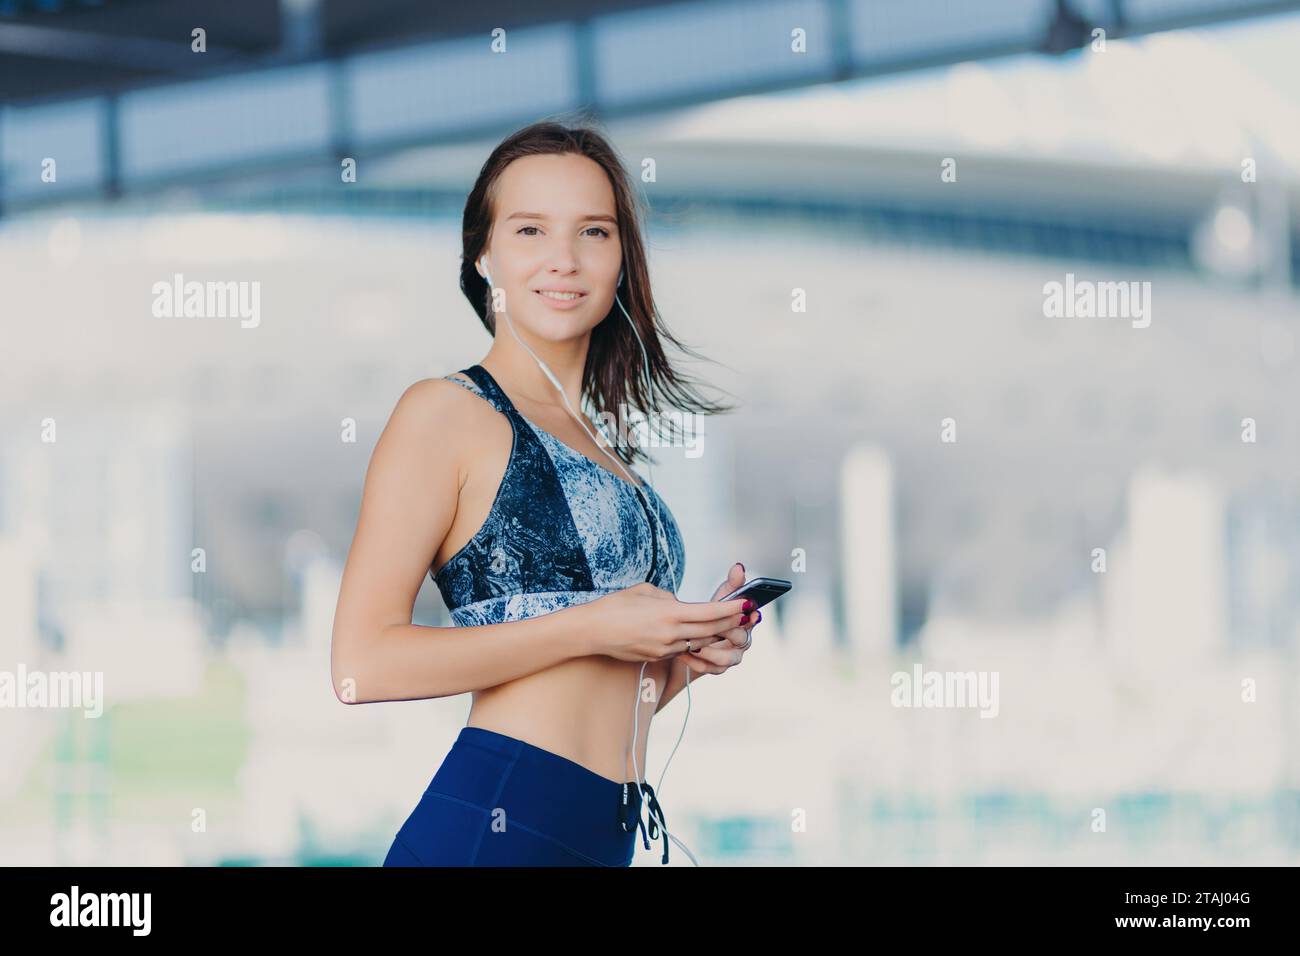 Confident woman in sportswear with headphones and smartphone, urban setting Stock Photo